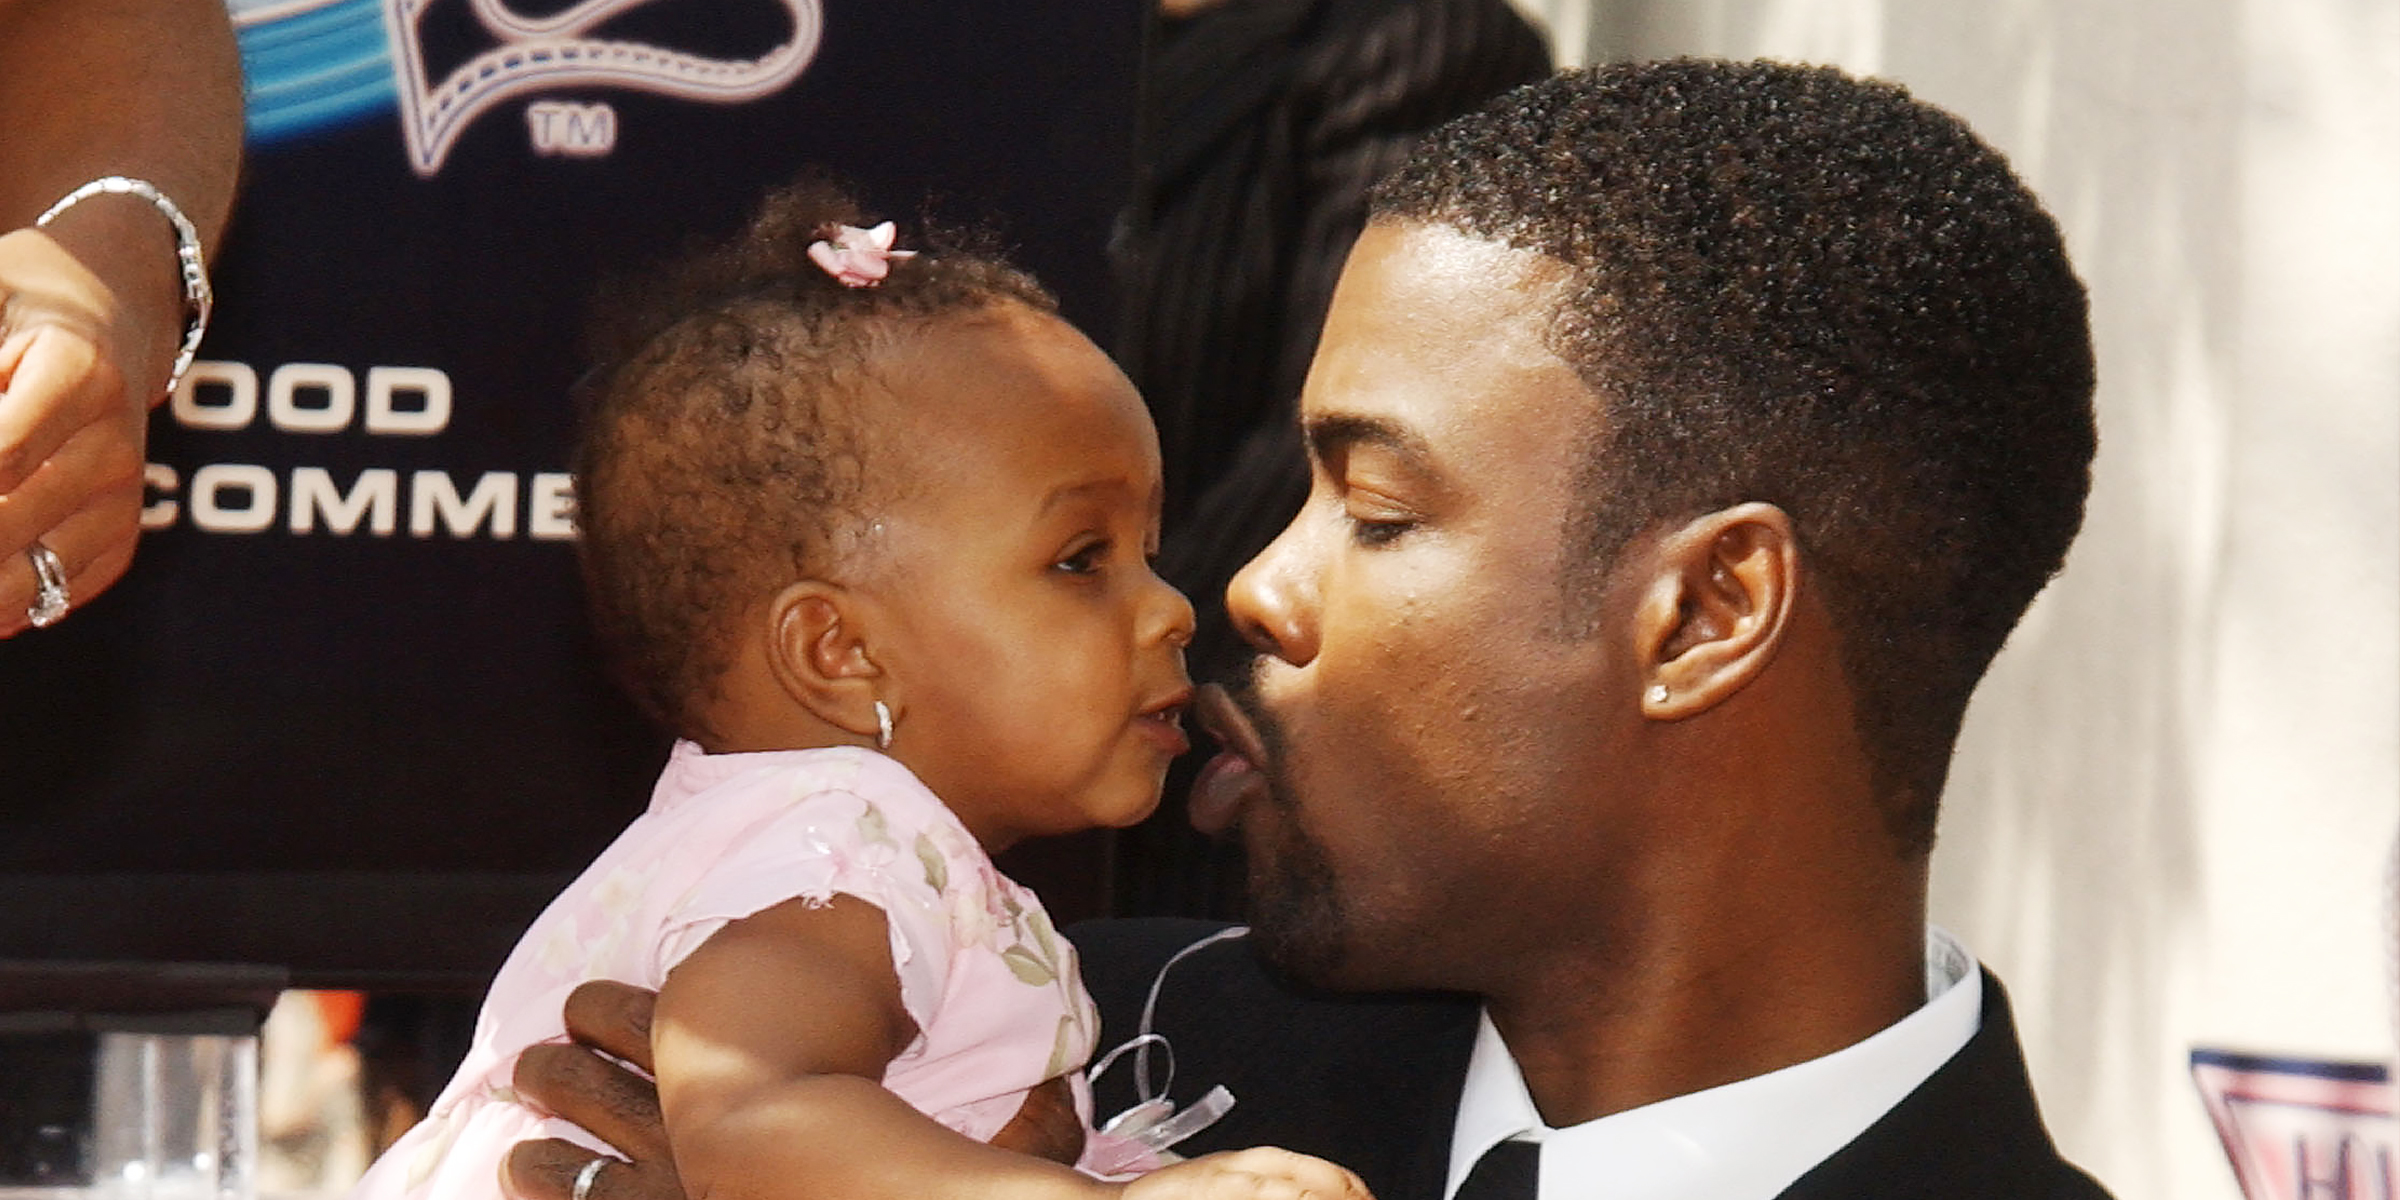 Lola Simone and Her Dad Chris Rock | Source: Getty Images